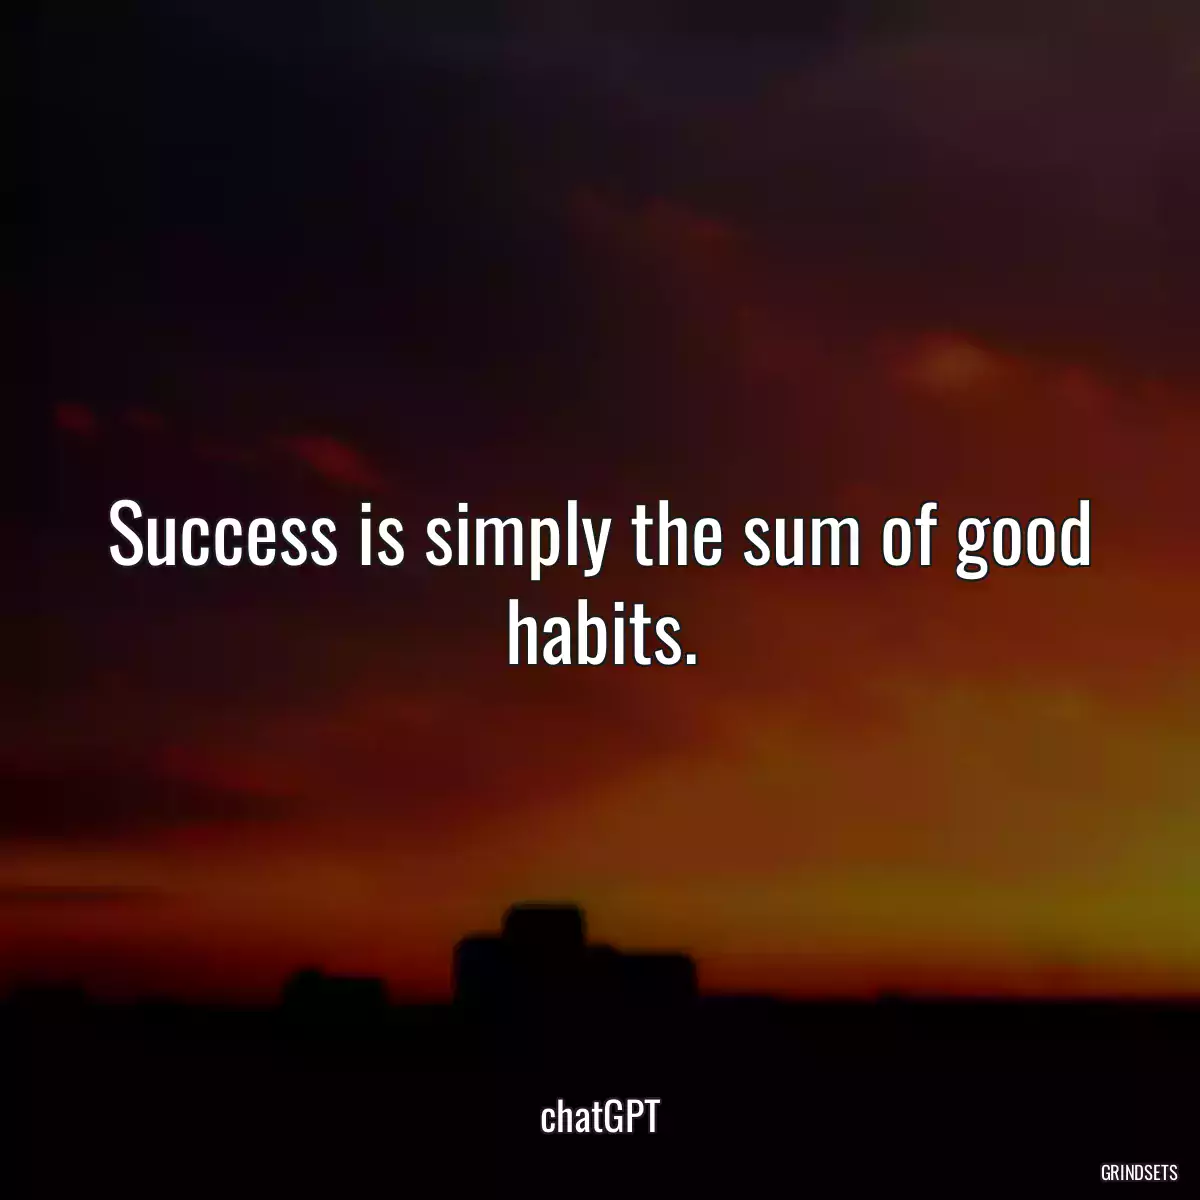 Success is simply the sum of good habits.